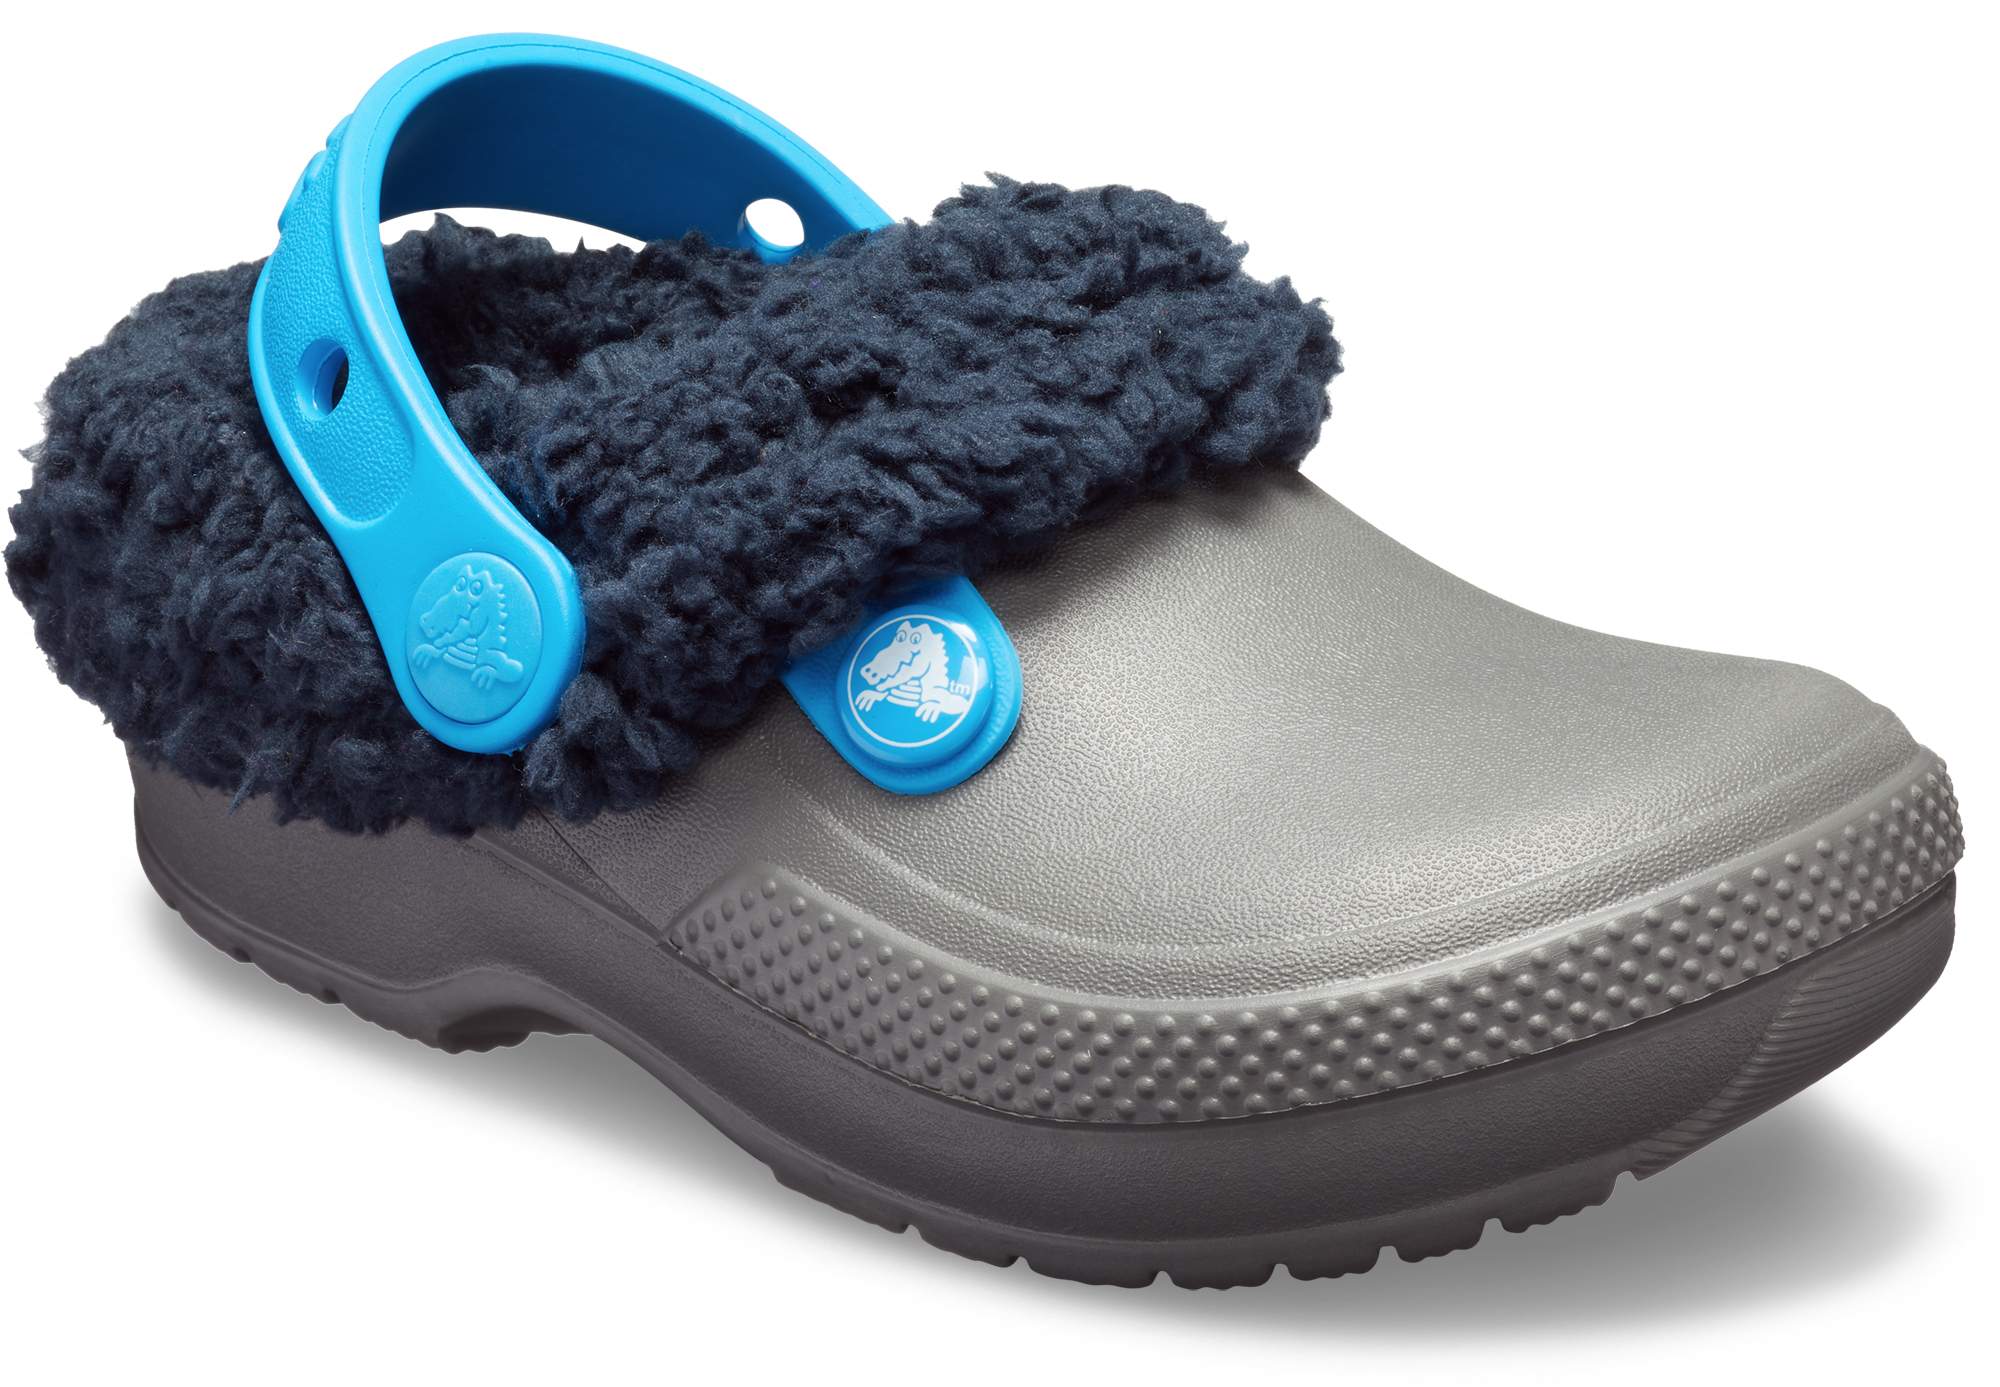 crocs liners are removable